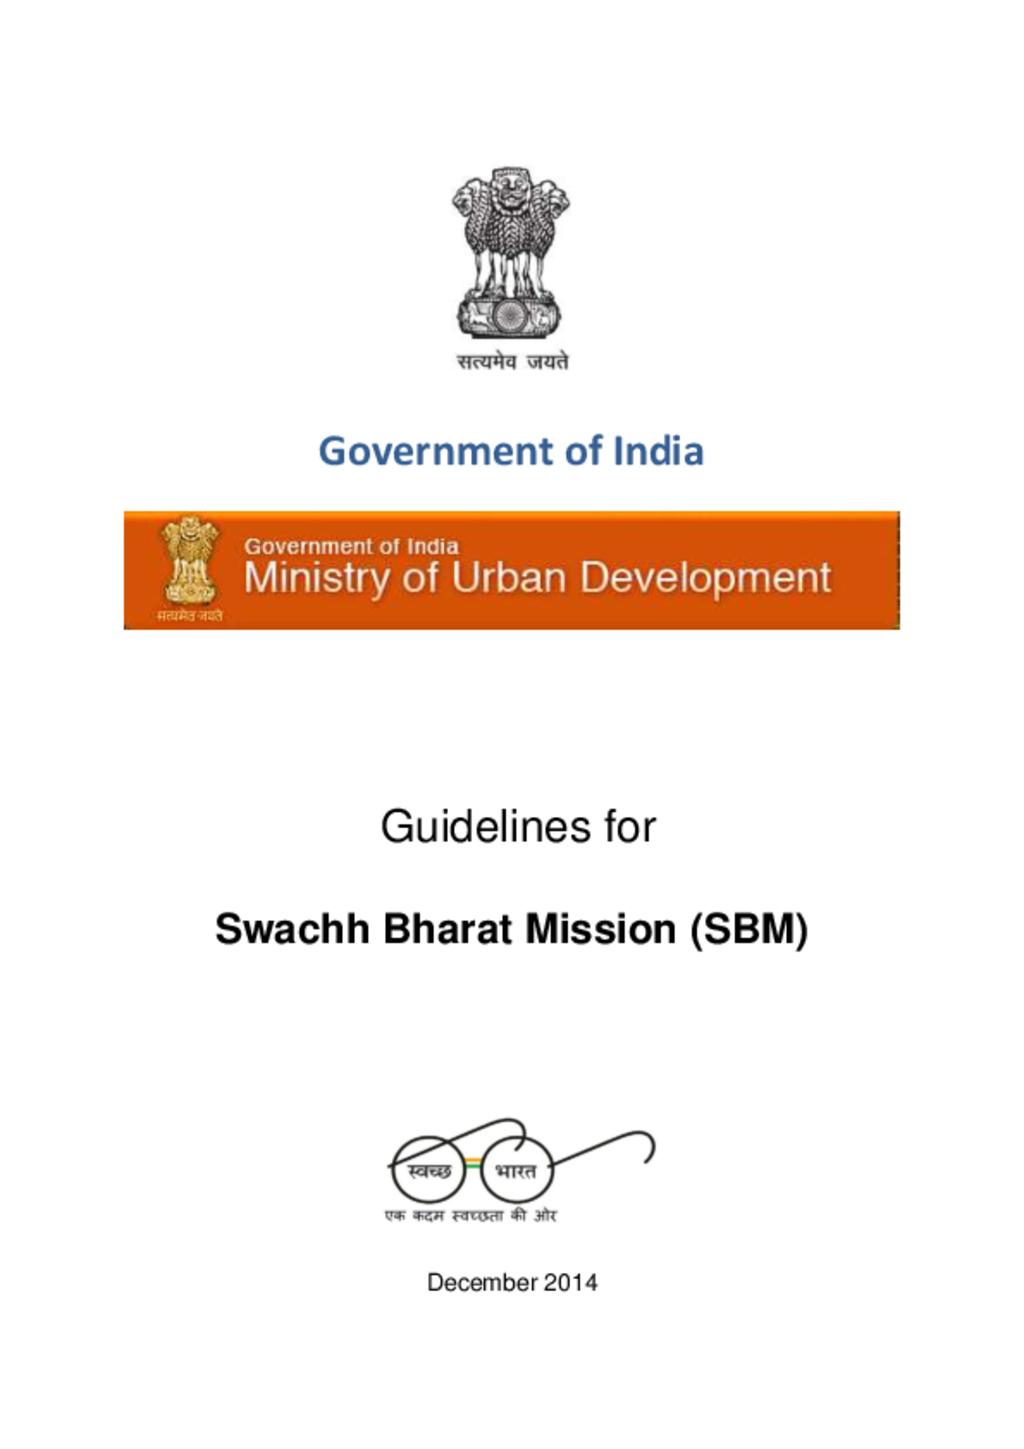 Guidelines for Swachh Bharat Mission